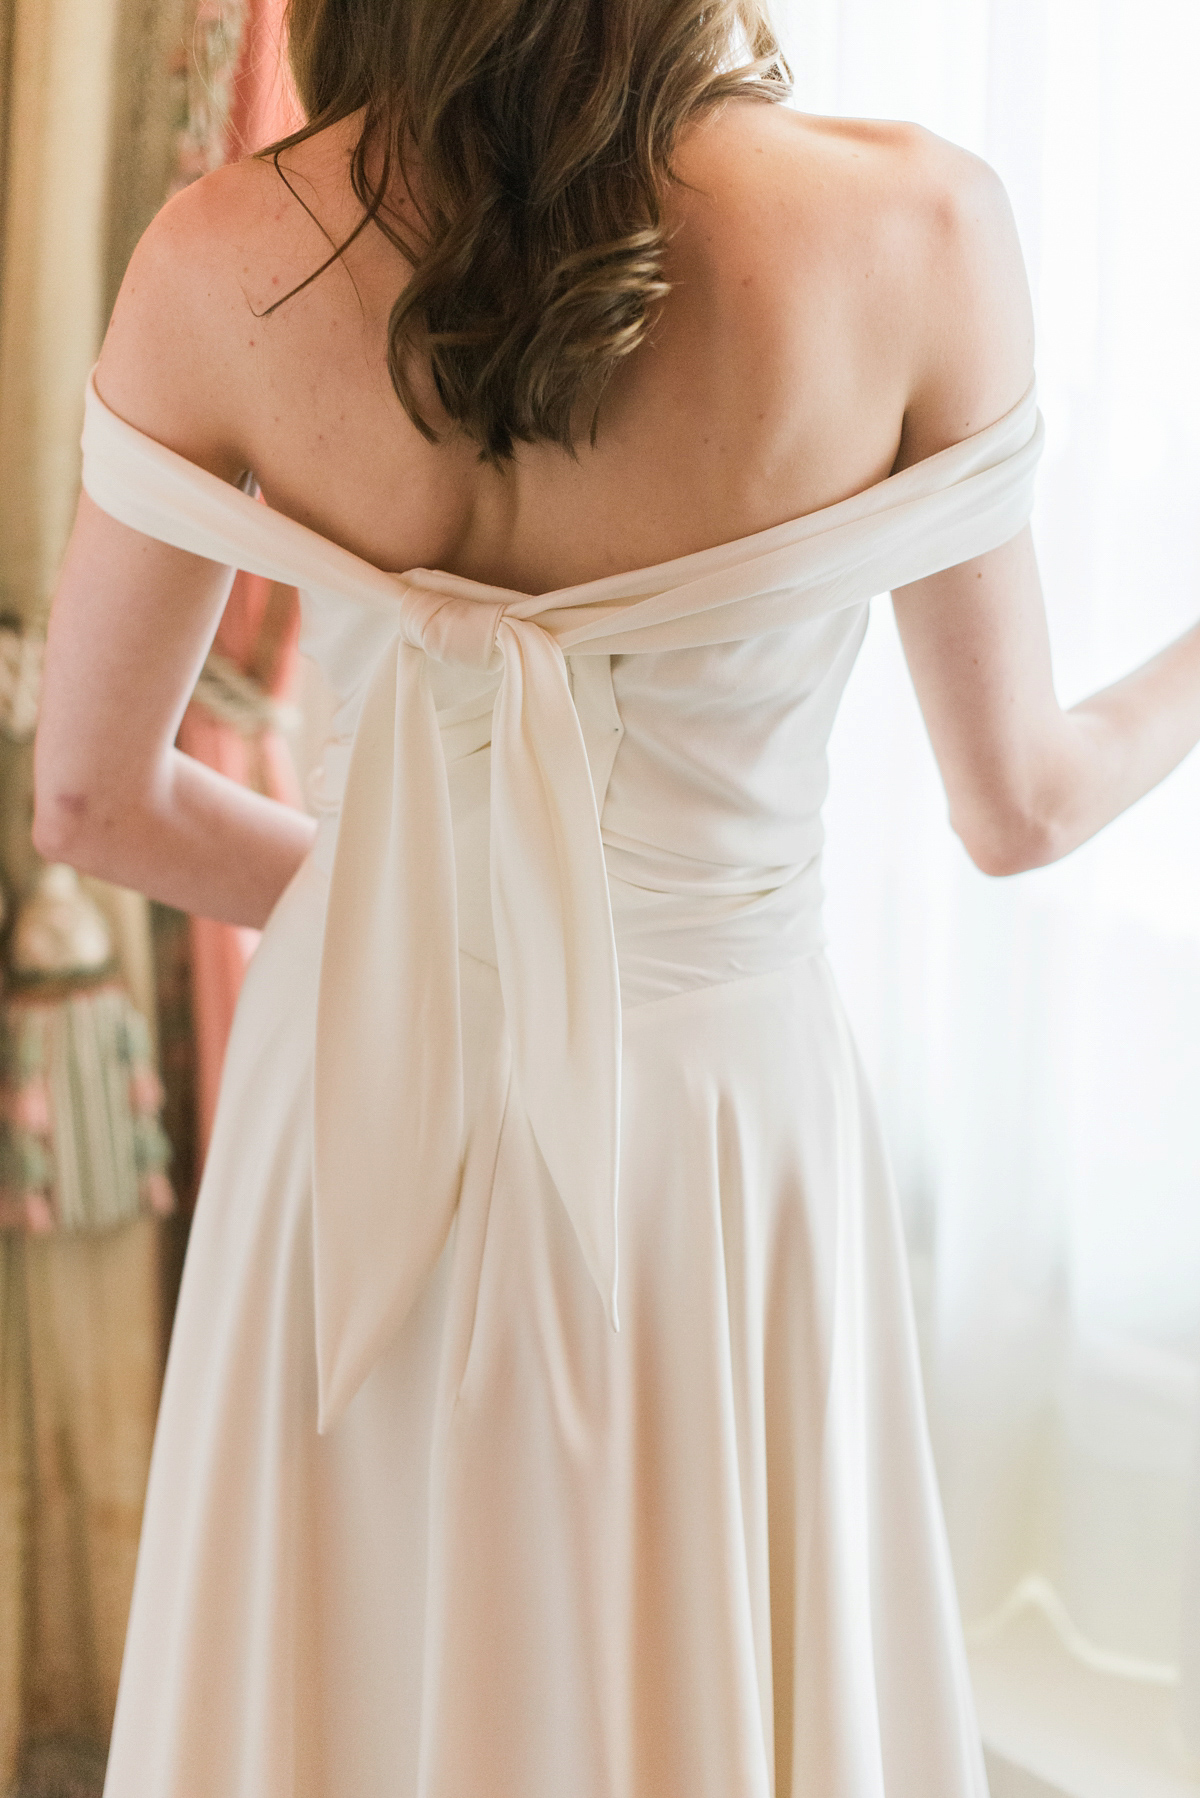 Halfpenny London - a beautiful collection of wedding dresses for the stylish modern bride.